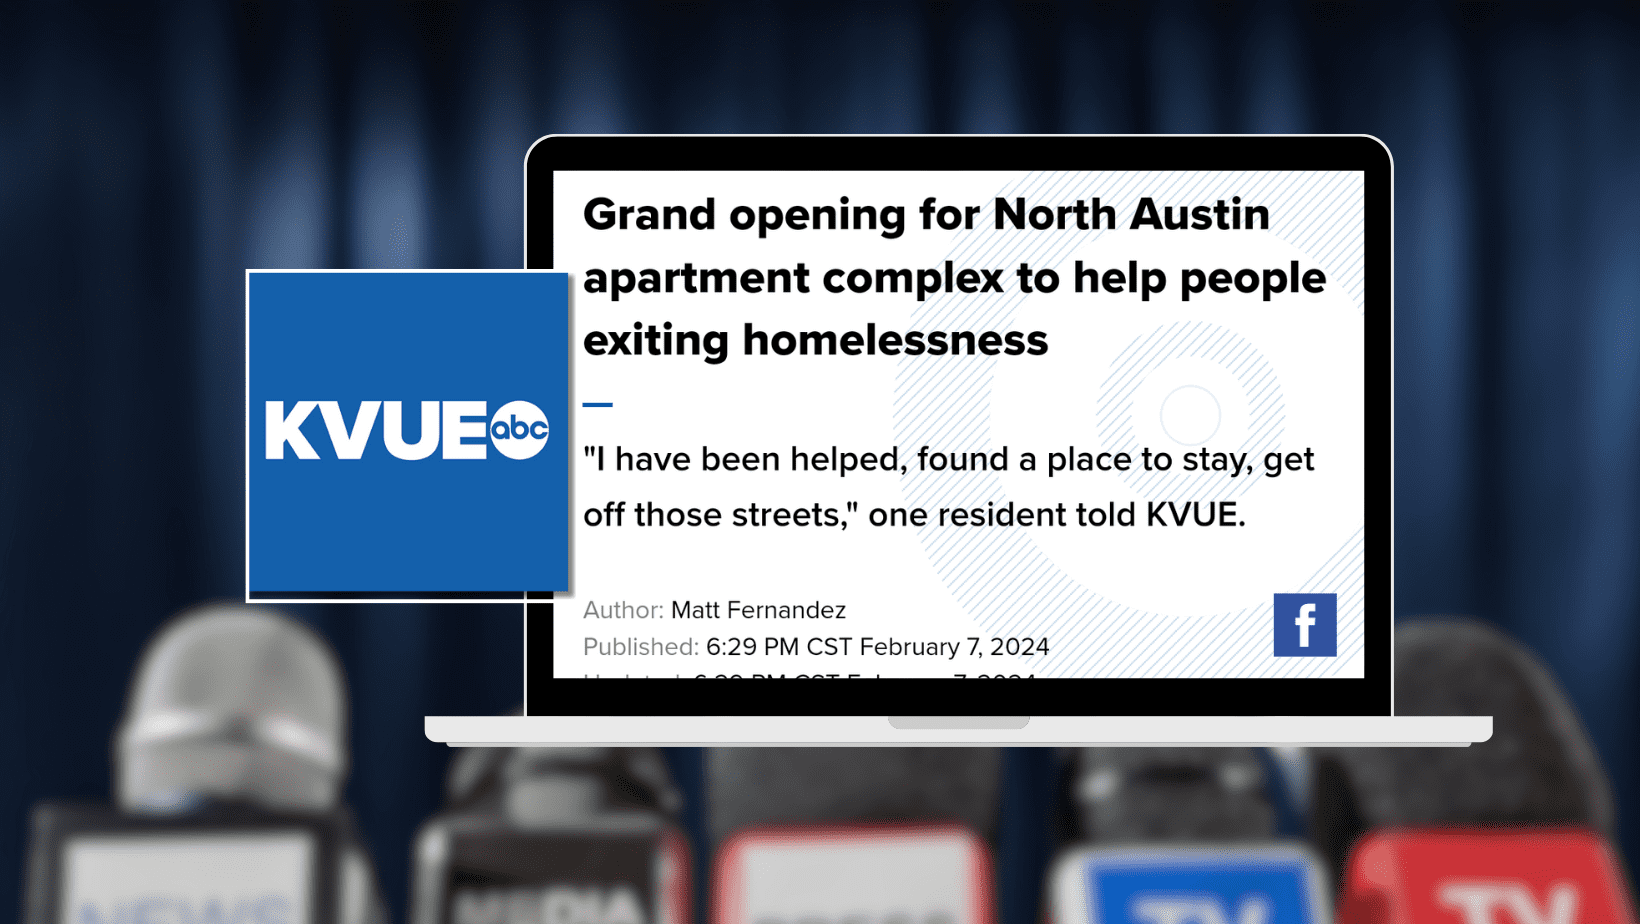 News microphones in background with image of KVUE logo and laptop displaying a news story with headline "Grand opening for North Austin apartment complex to help people exiting homelessness"